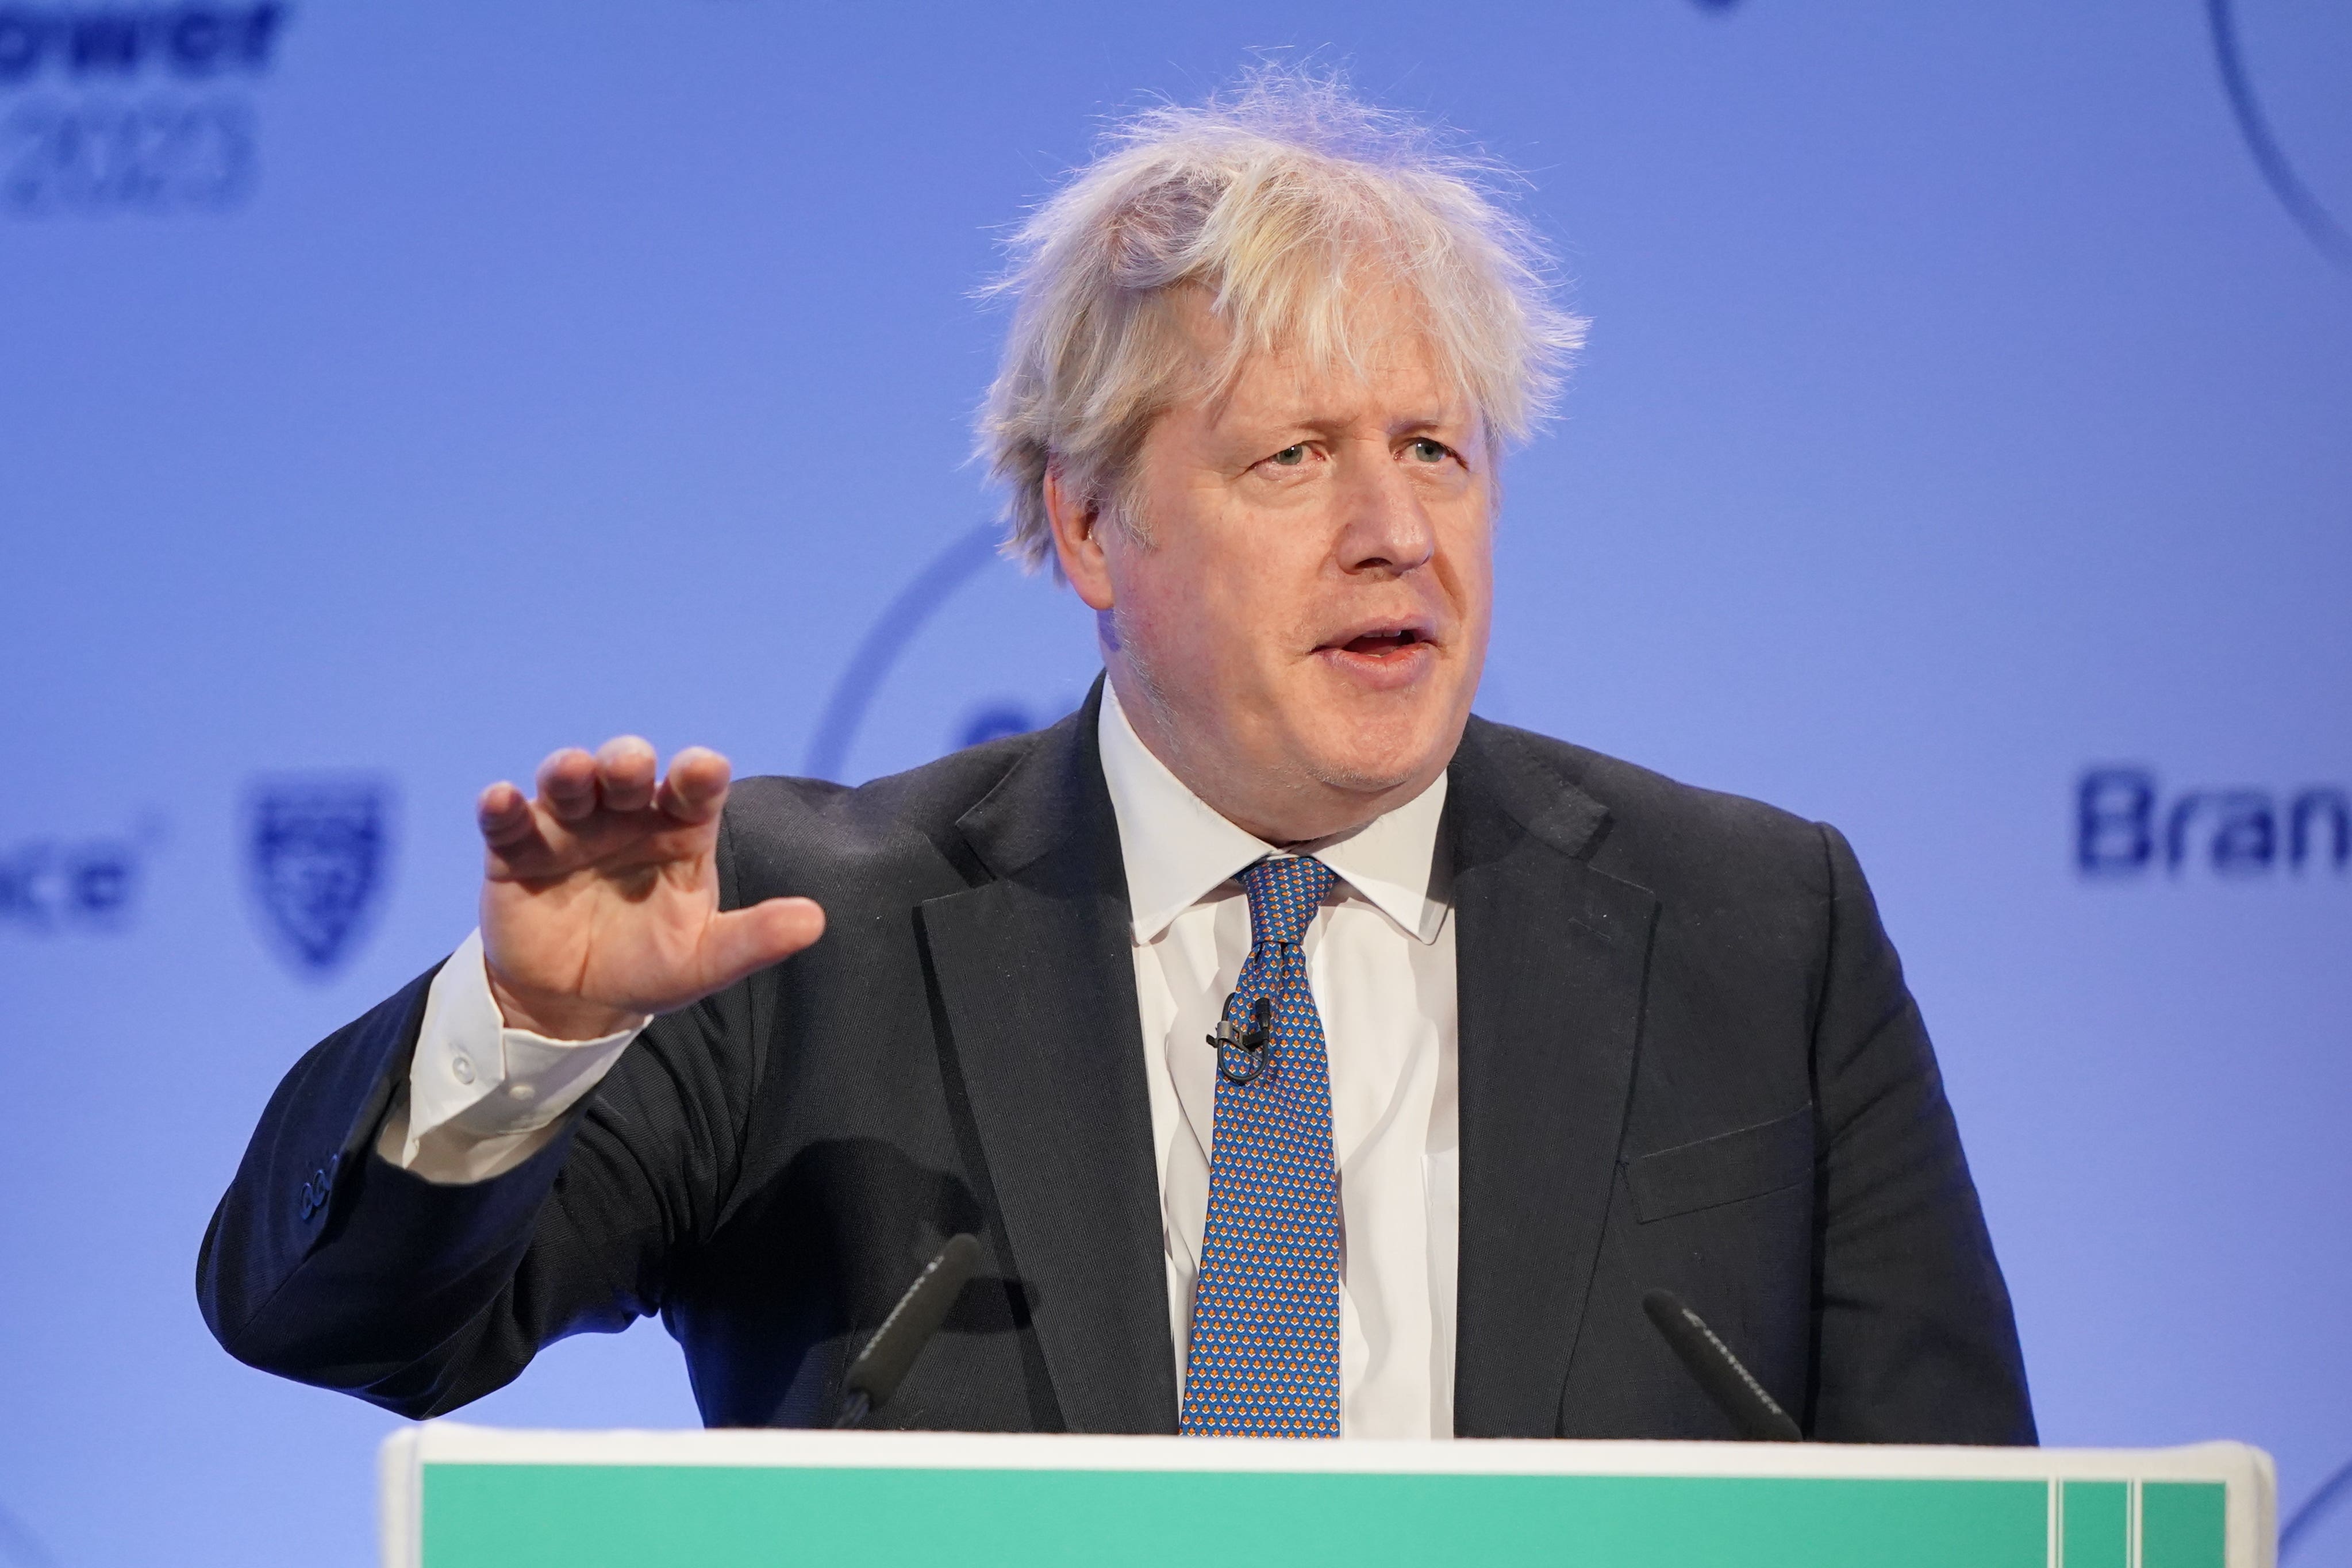 Former prime minister Boris Johnson called those who died on board the Titan ‘heroes’